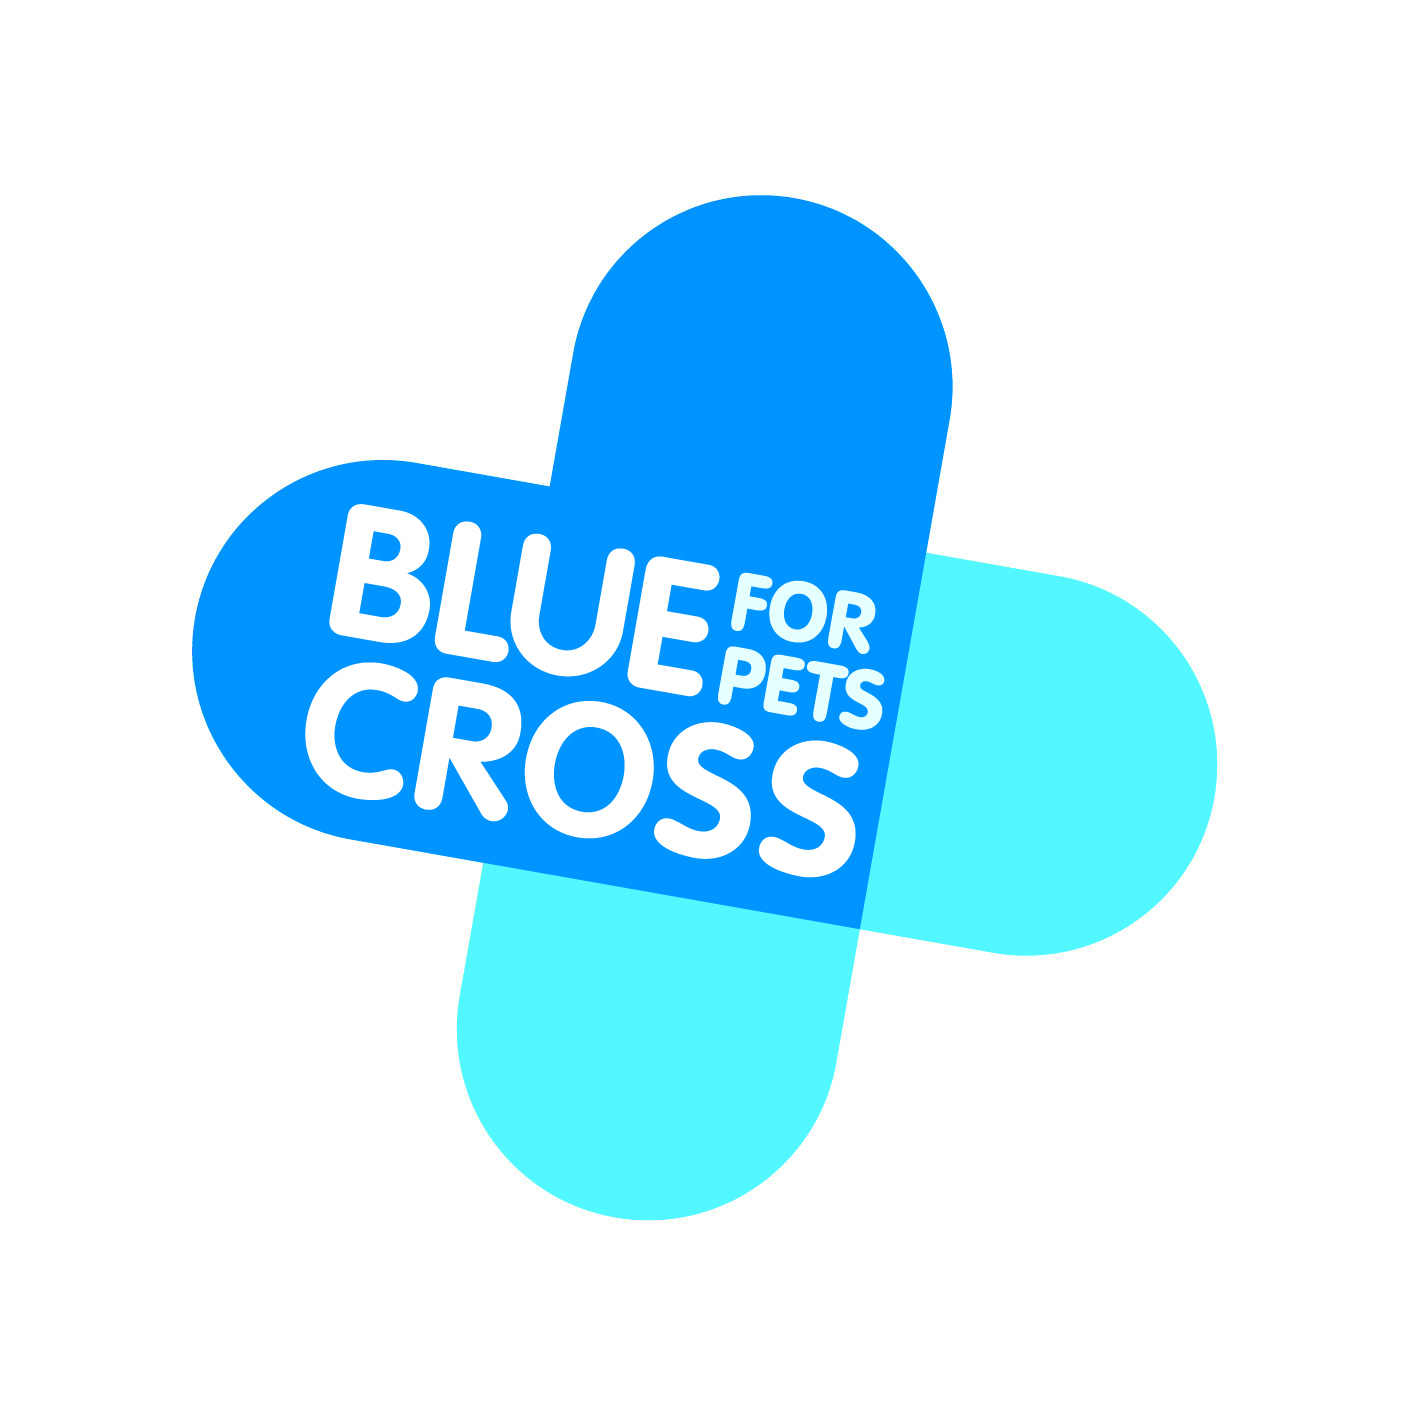 Blue Cross For Pets